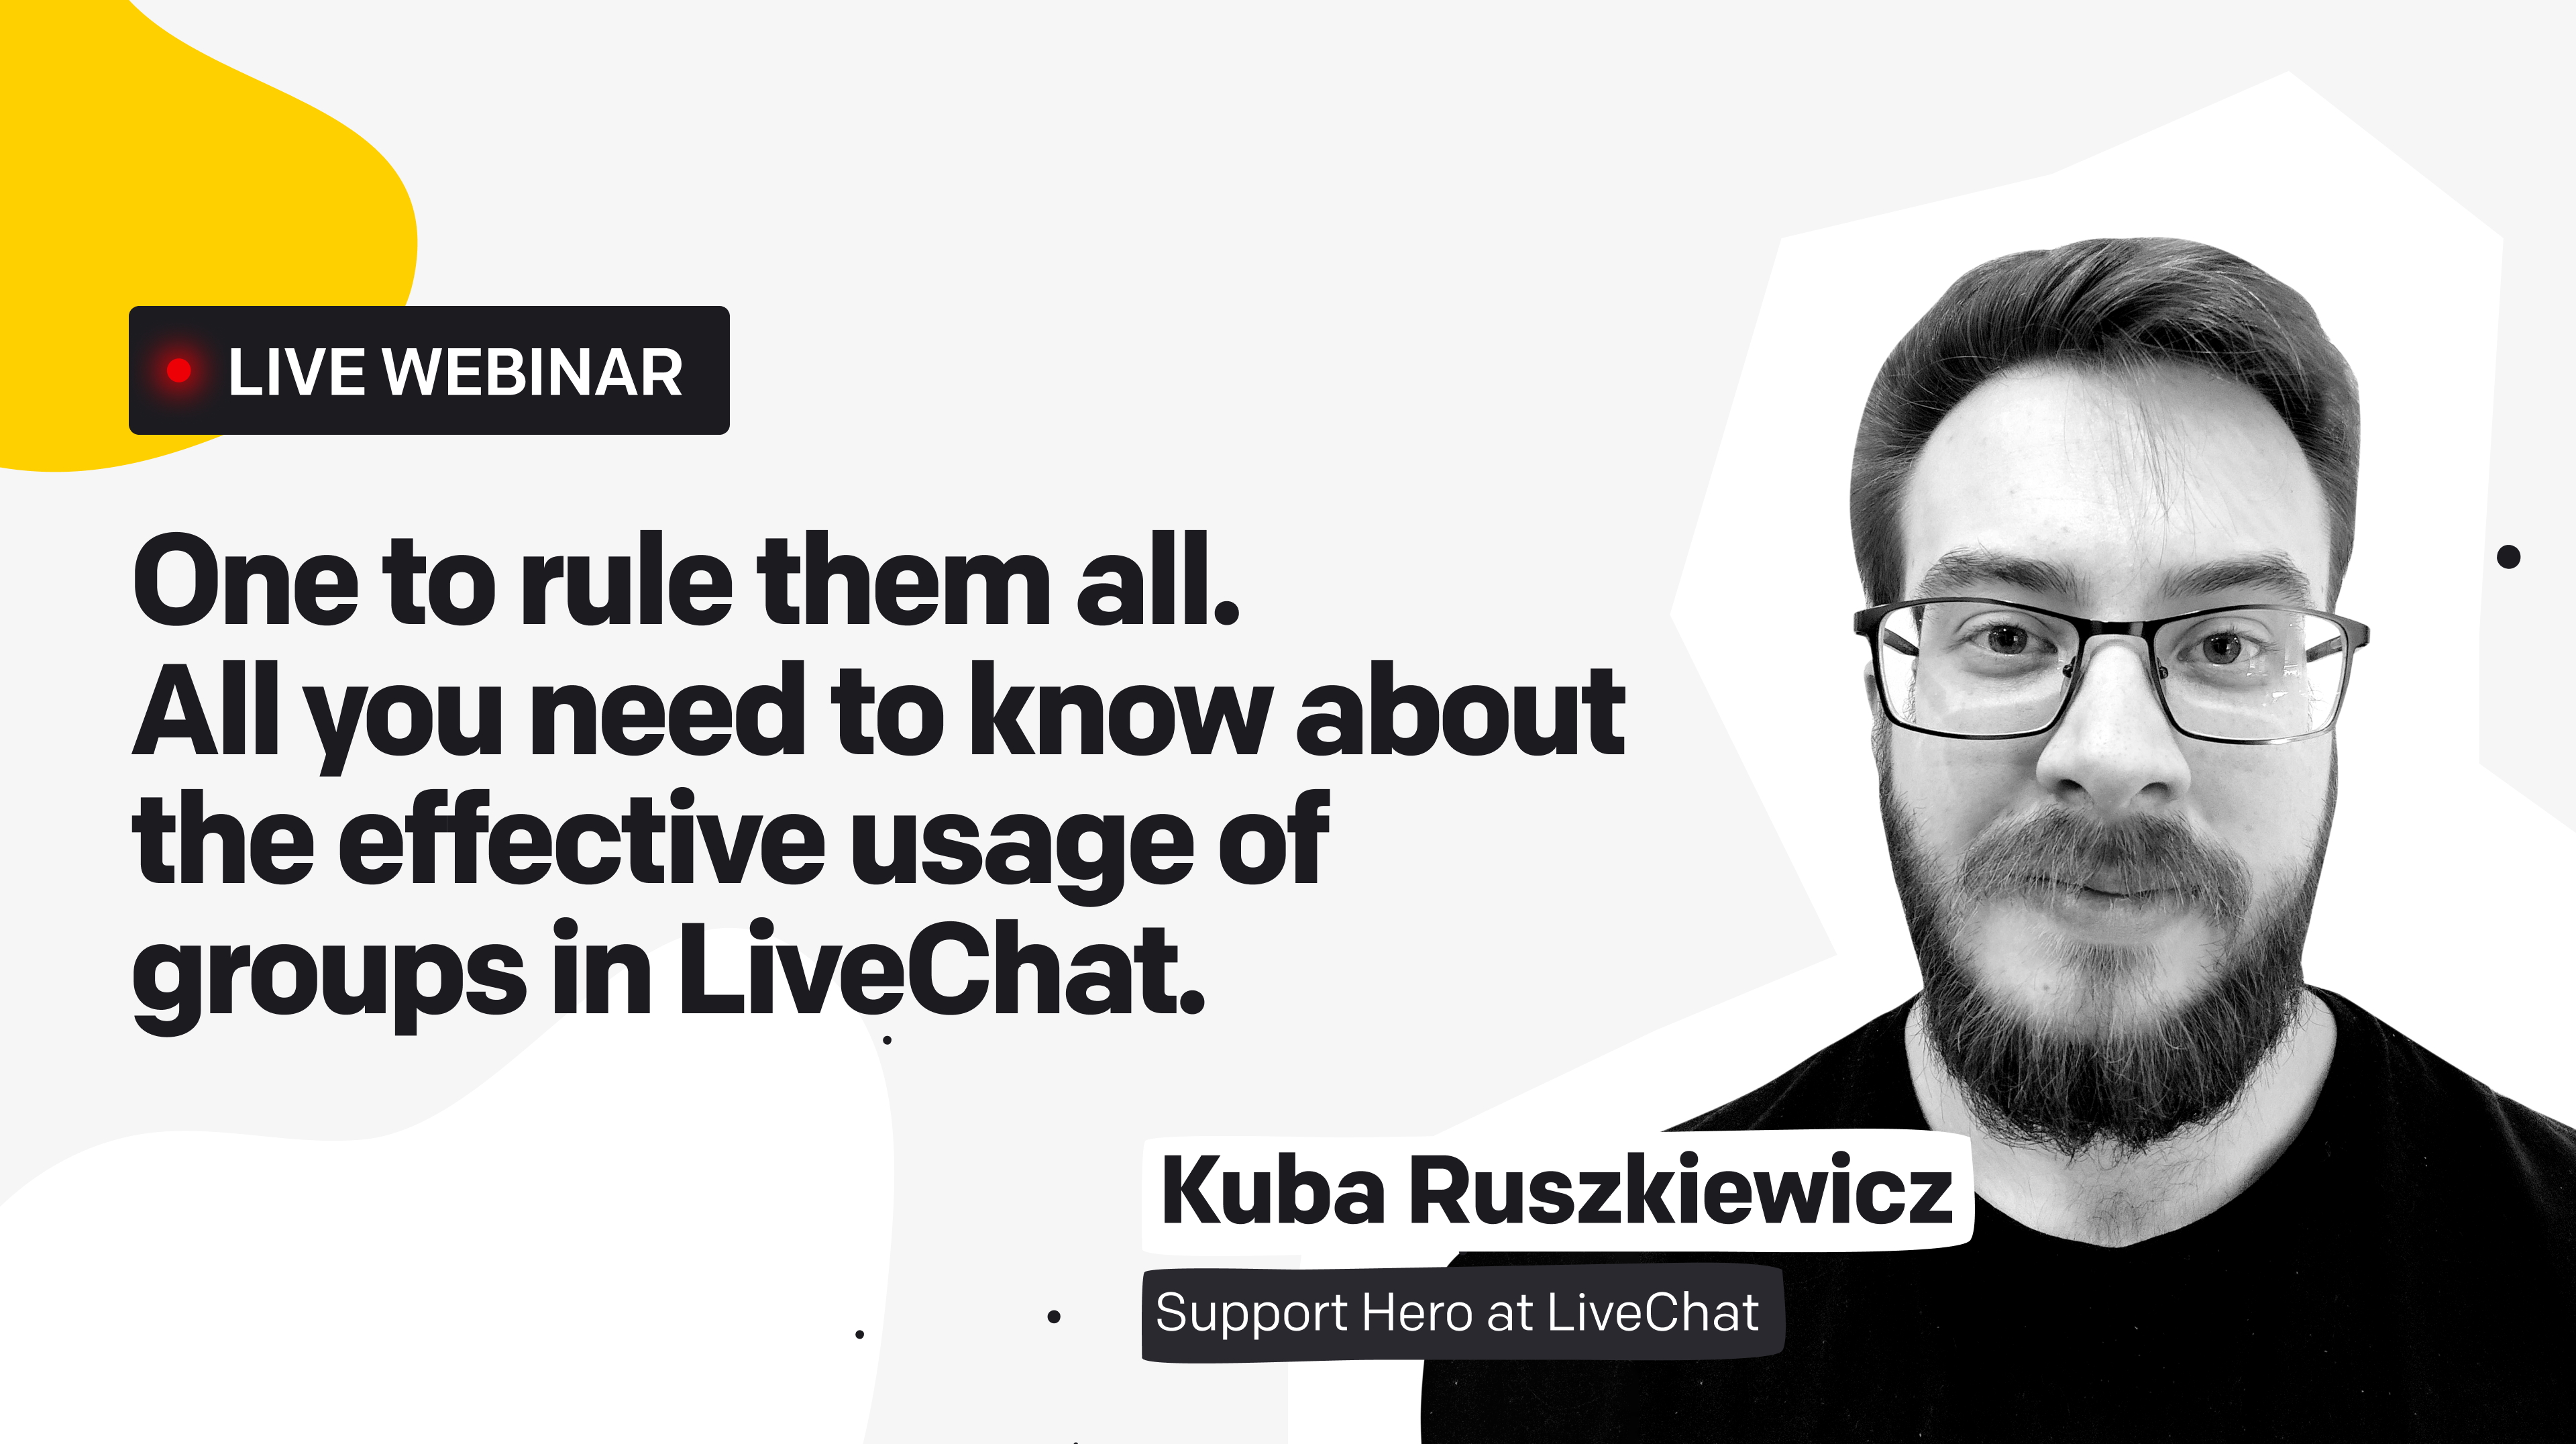 One to rule them all. All you need to know about effective usage of groups in LiveChat